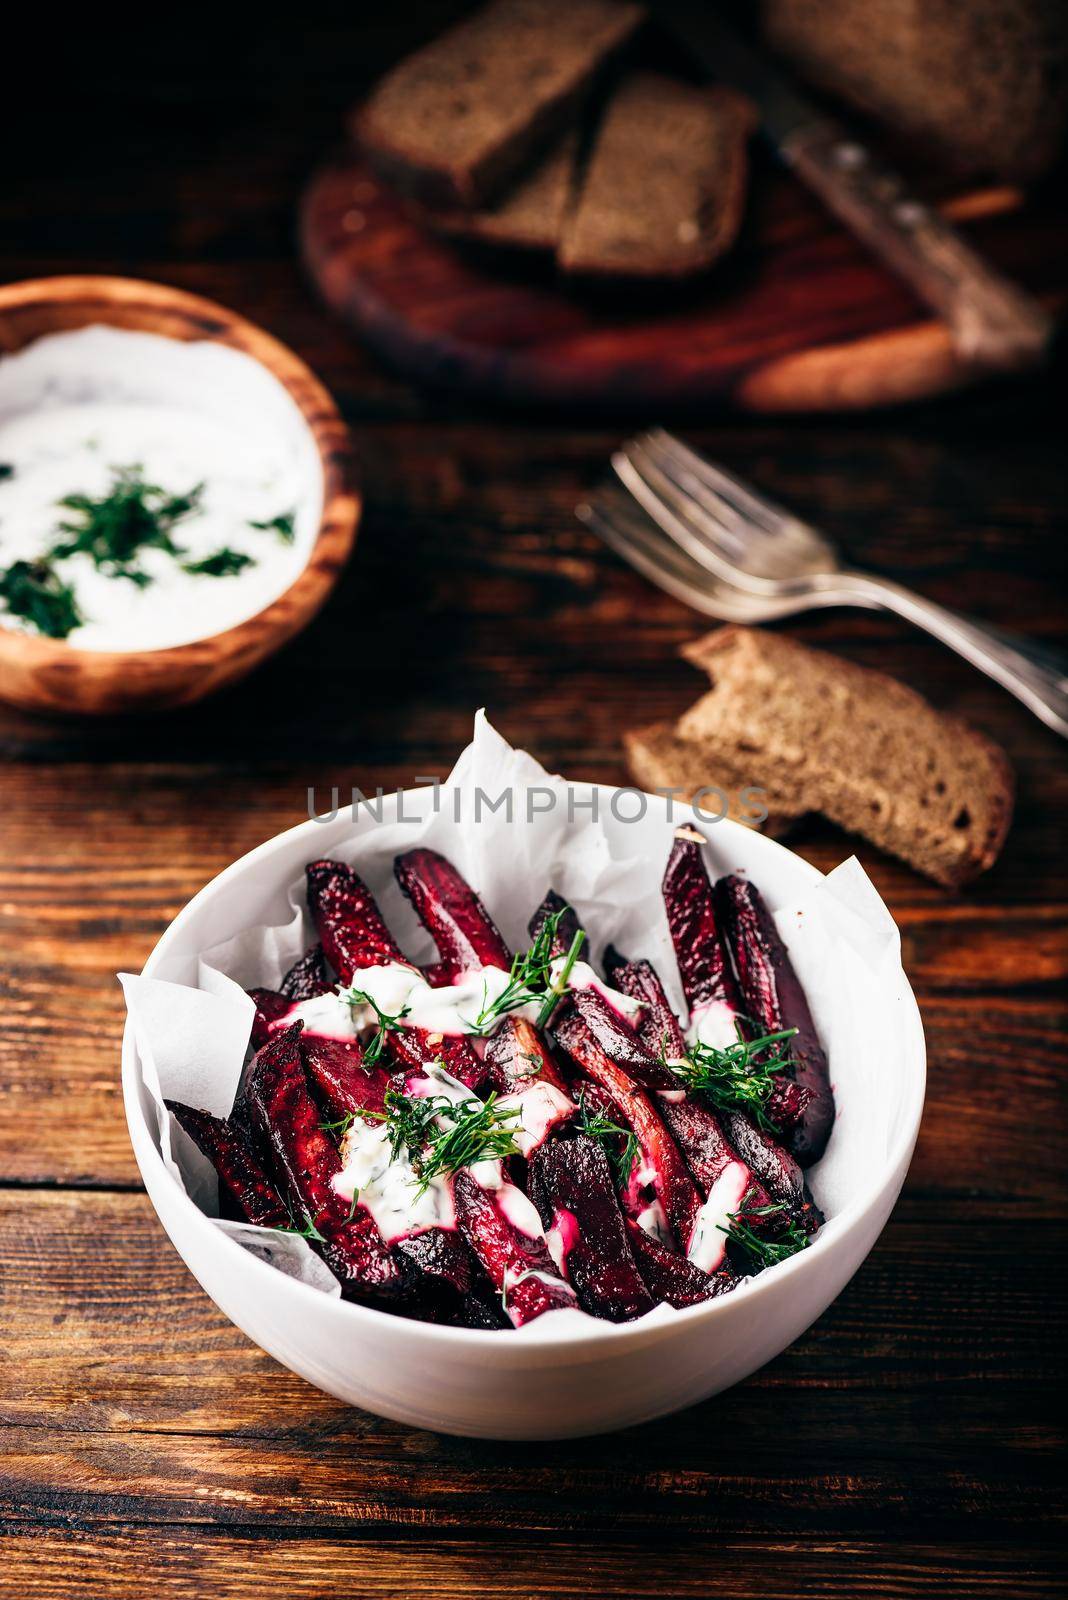 Oven baked beet fries with greek yogurt and dill by Seva_blsv